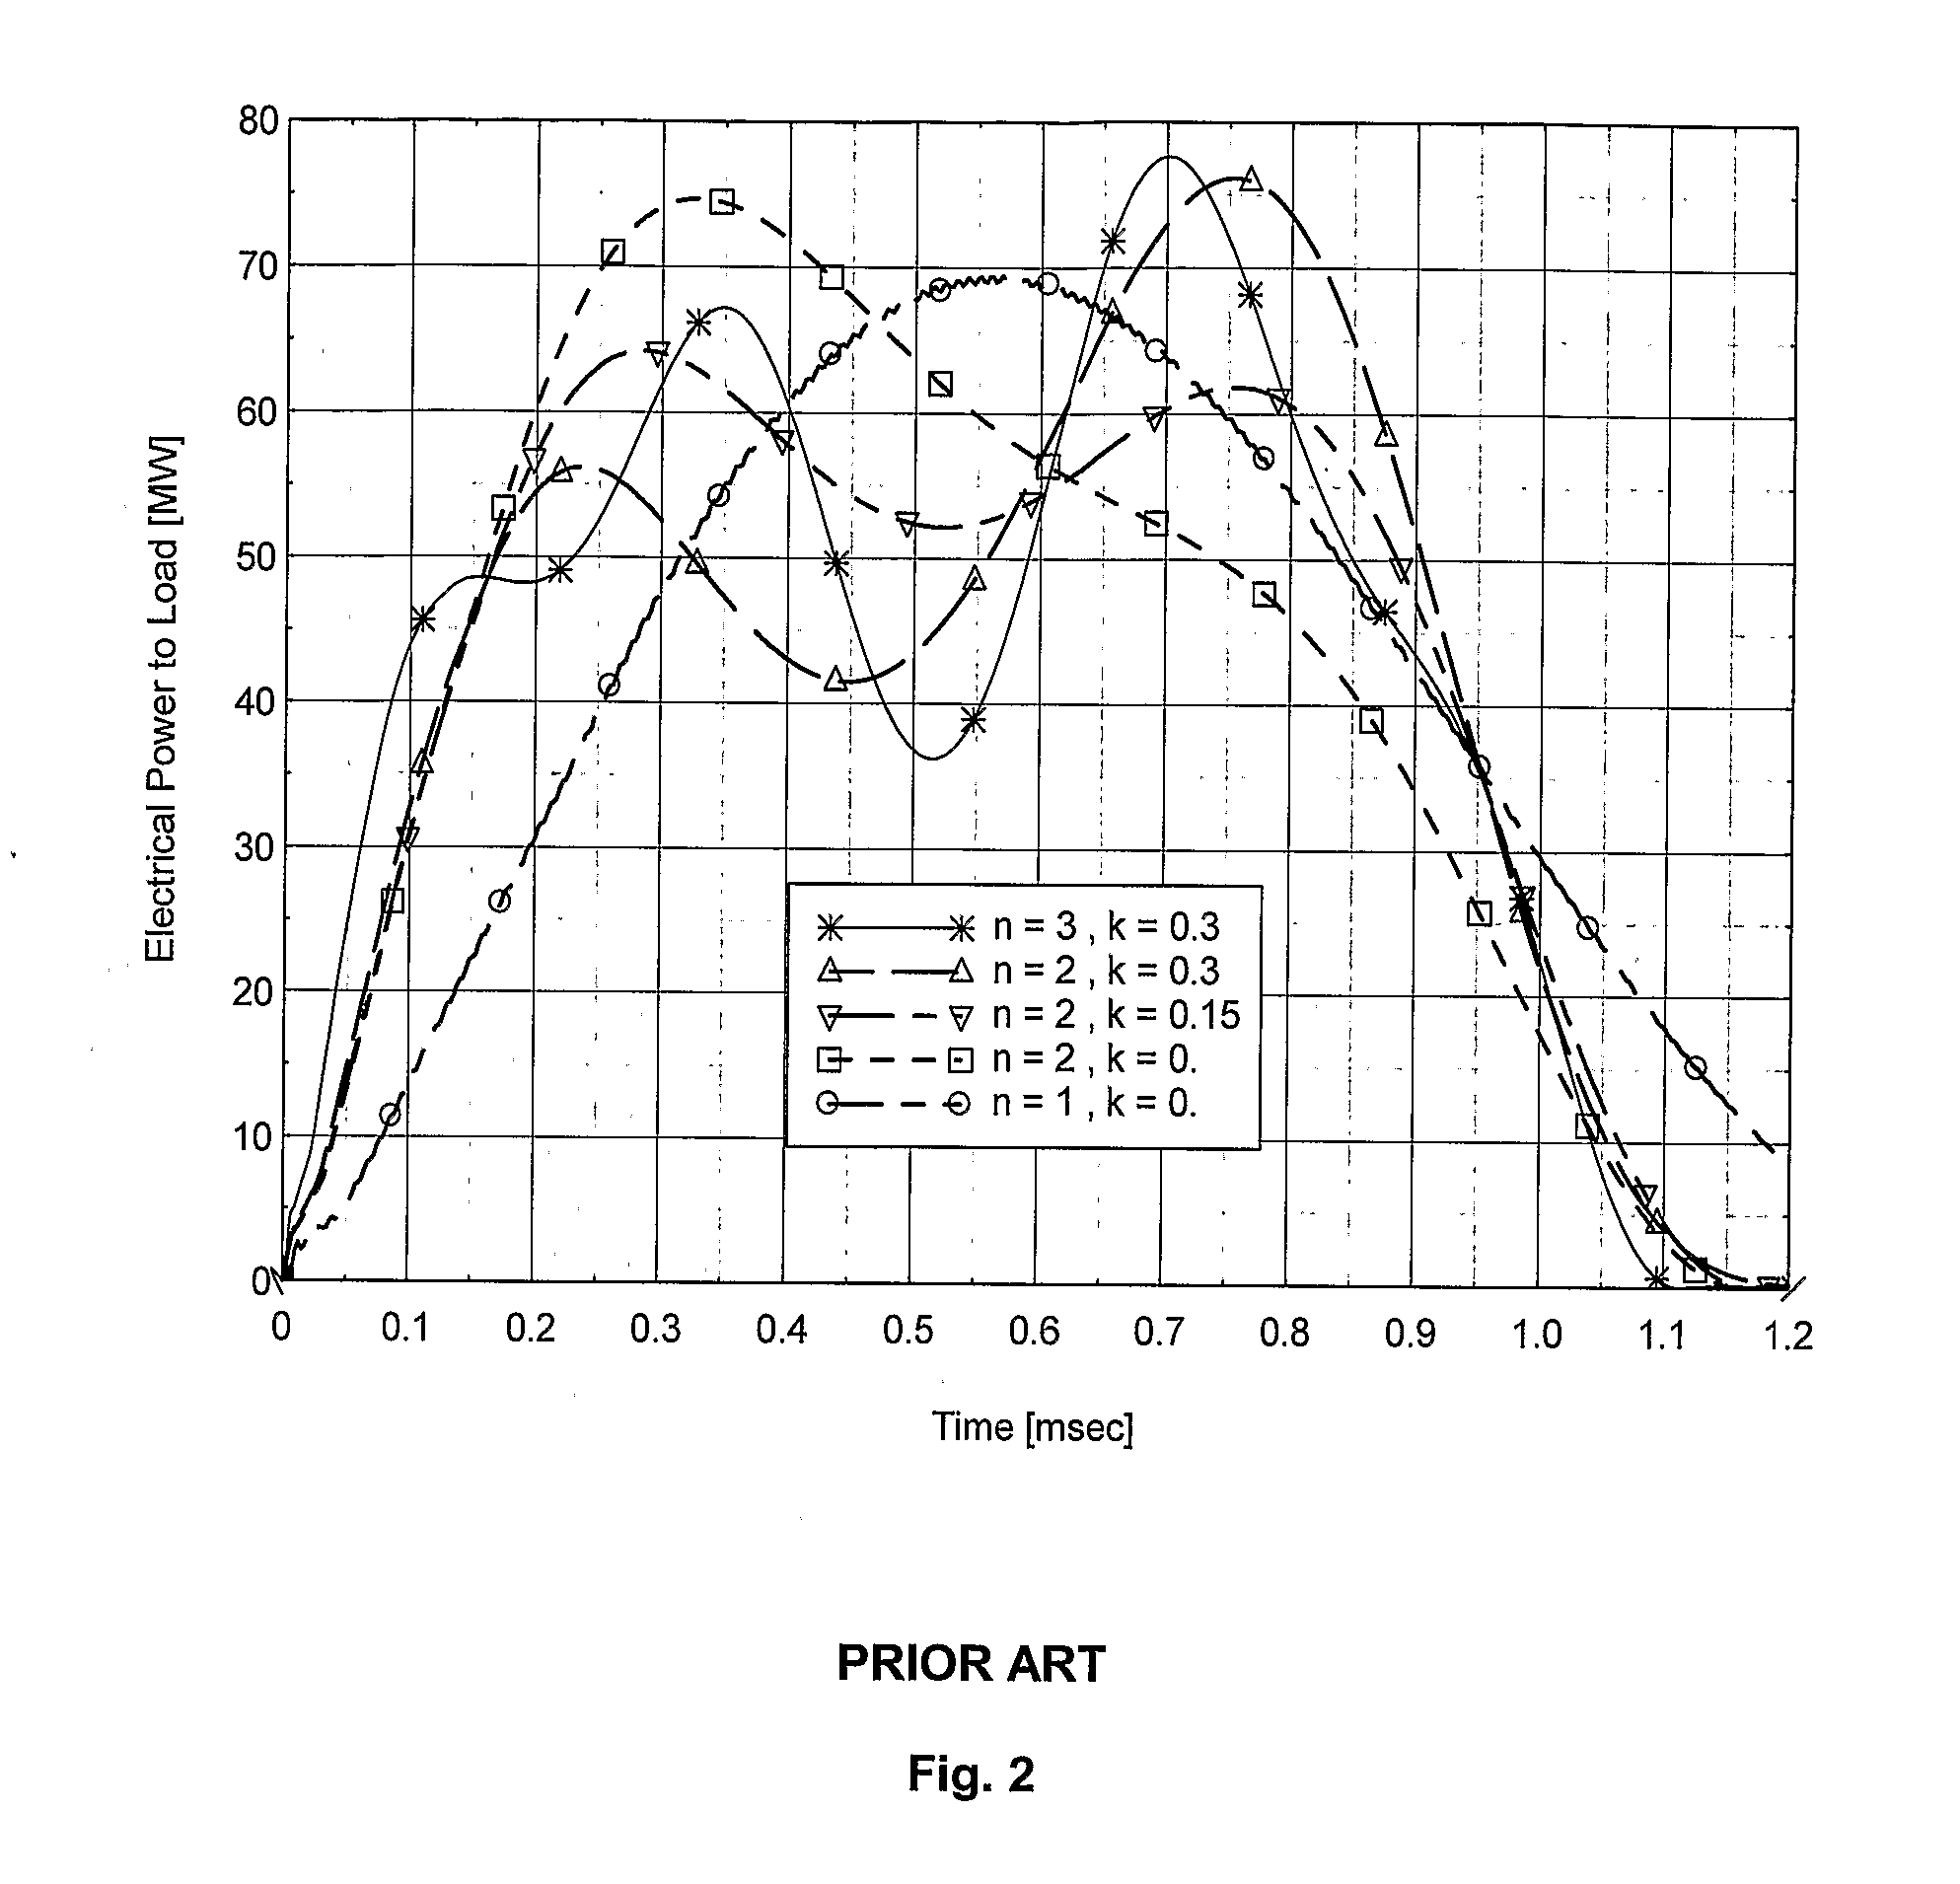 Pulse Forming Network And Pulse Generator